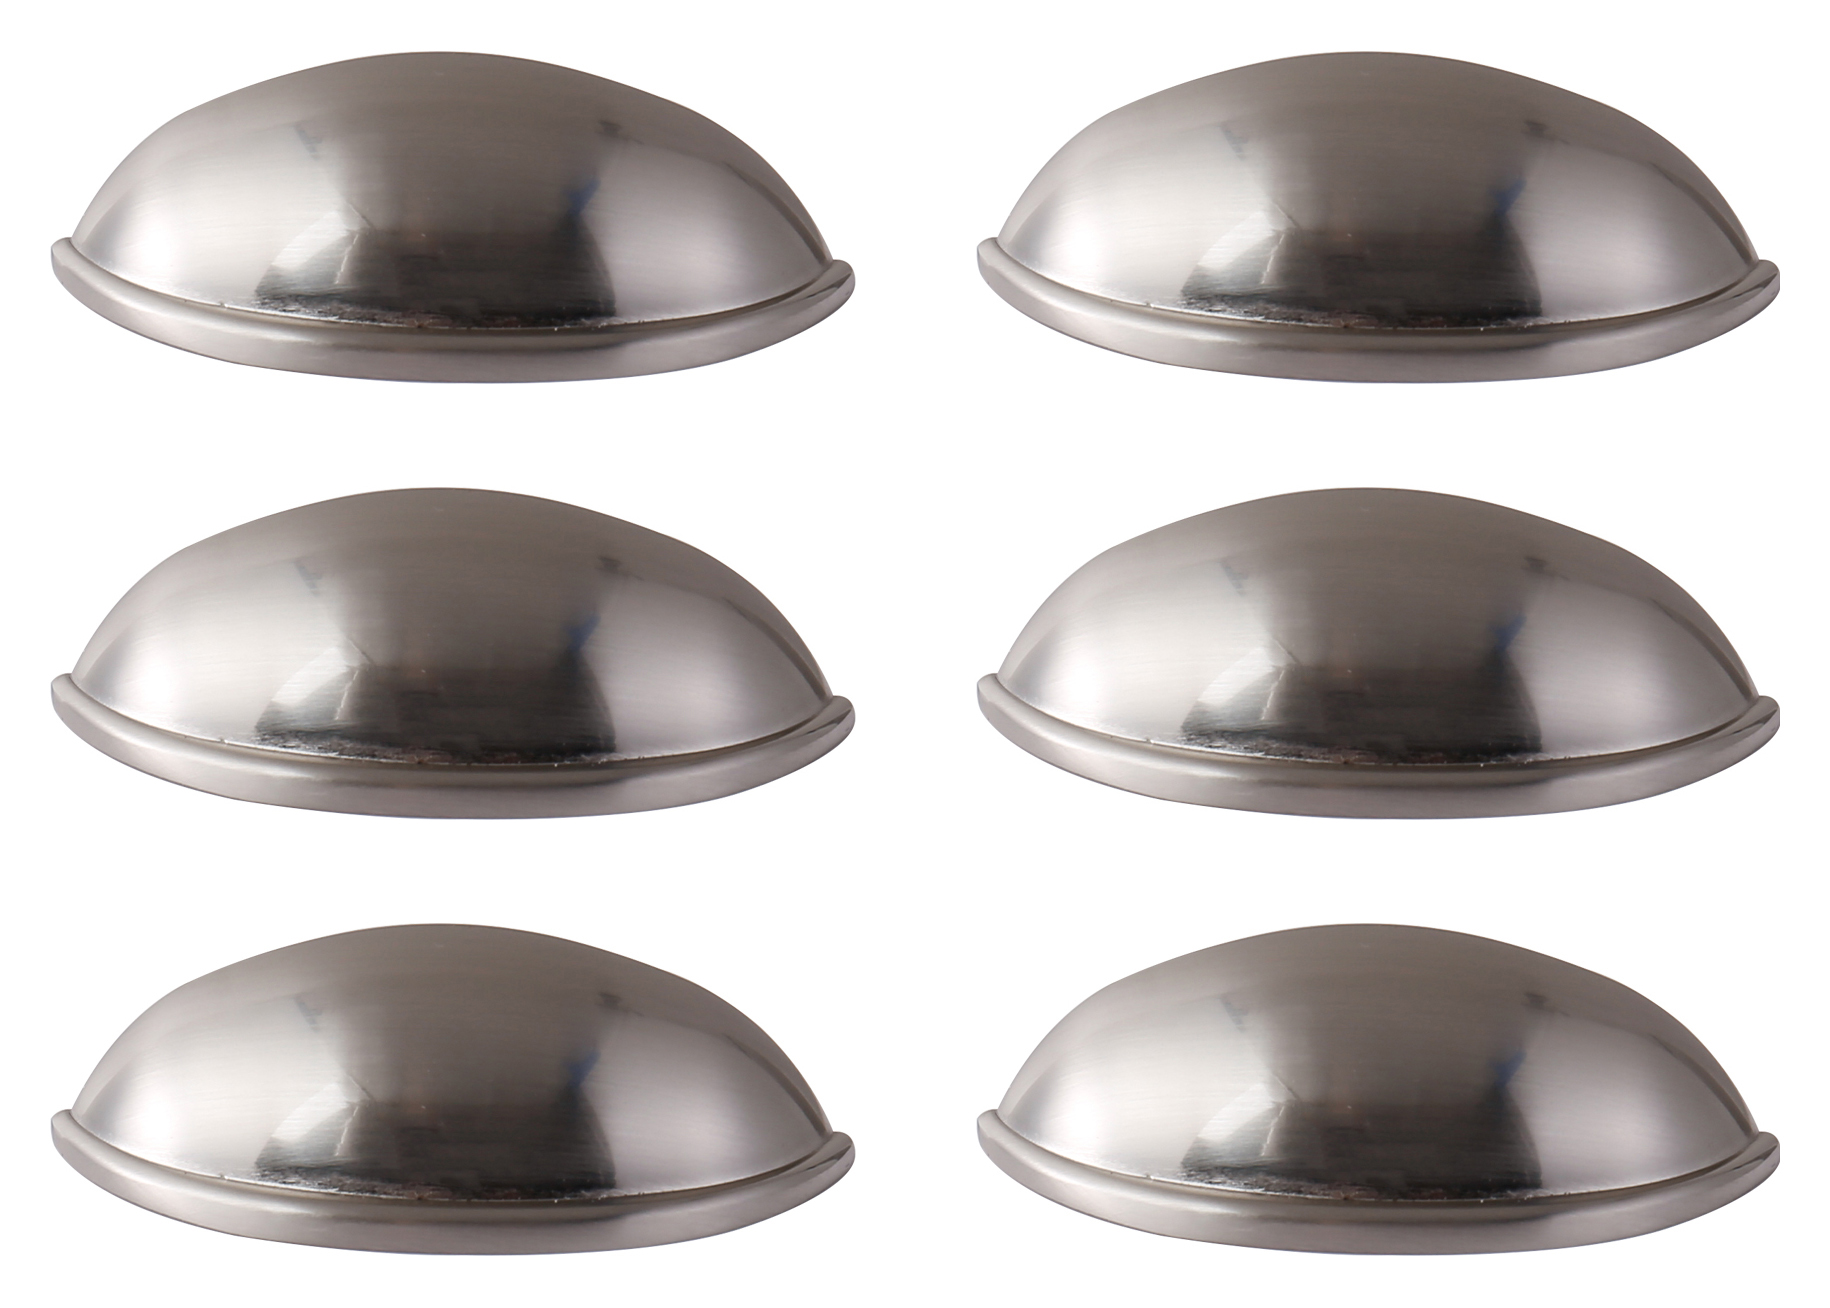 Cup Brushed Nickel Cabinet Handle - 84mm - Pack of 6